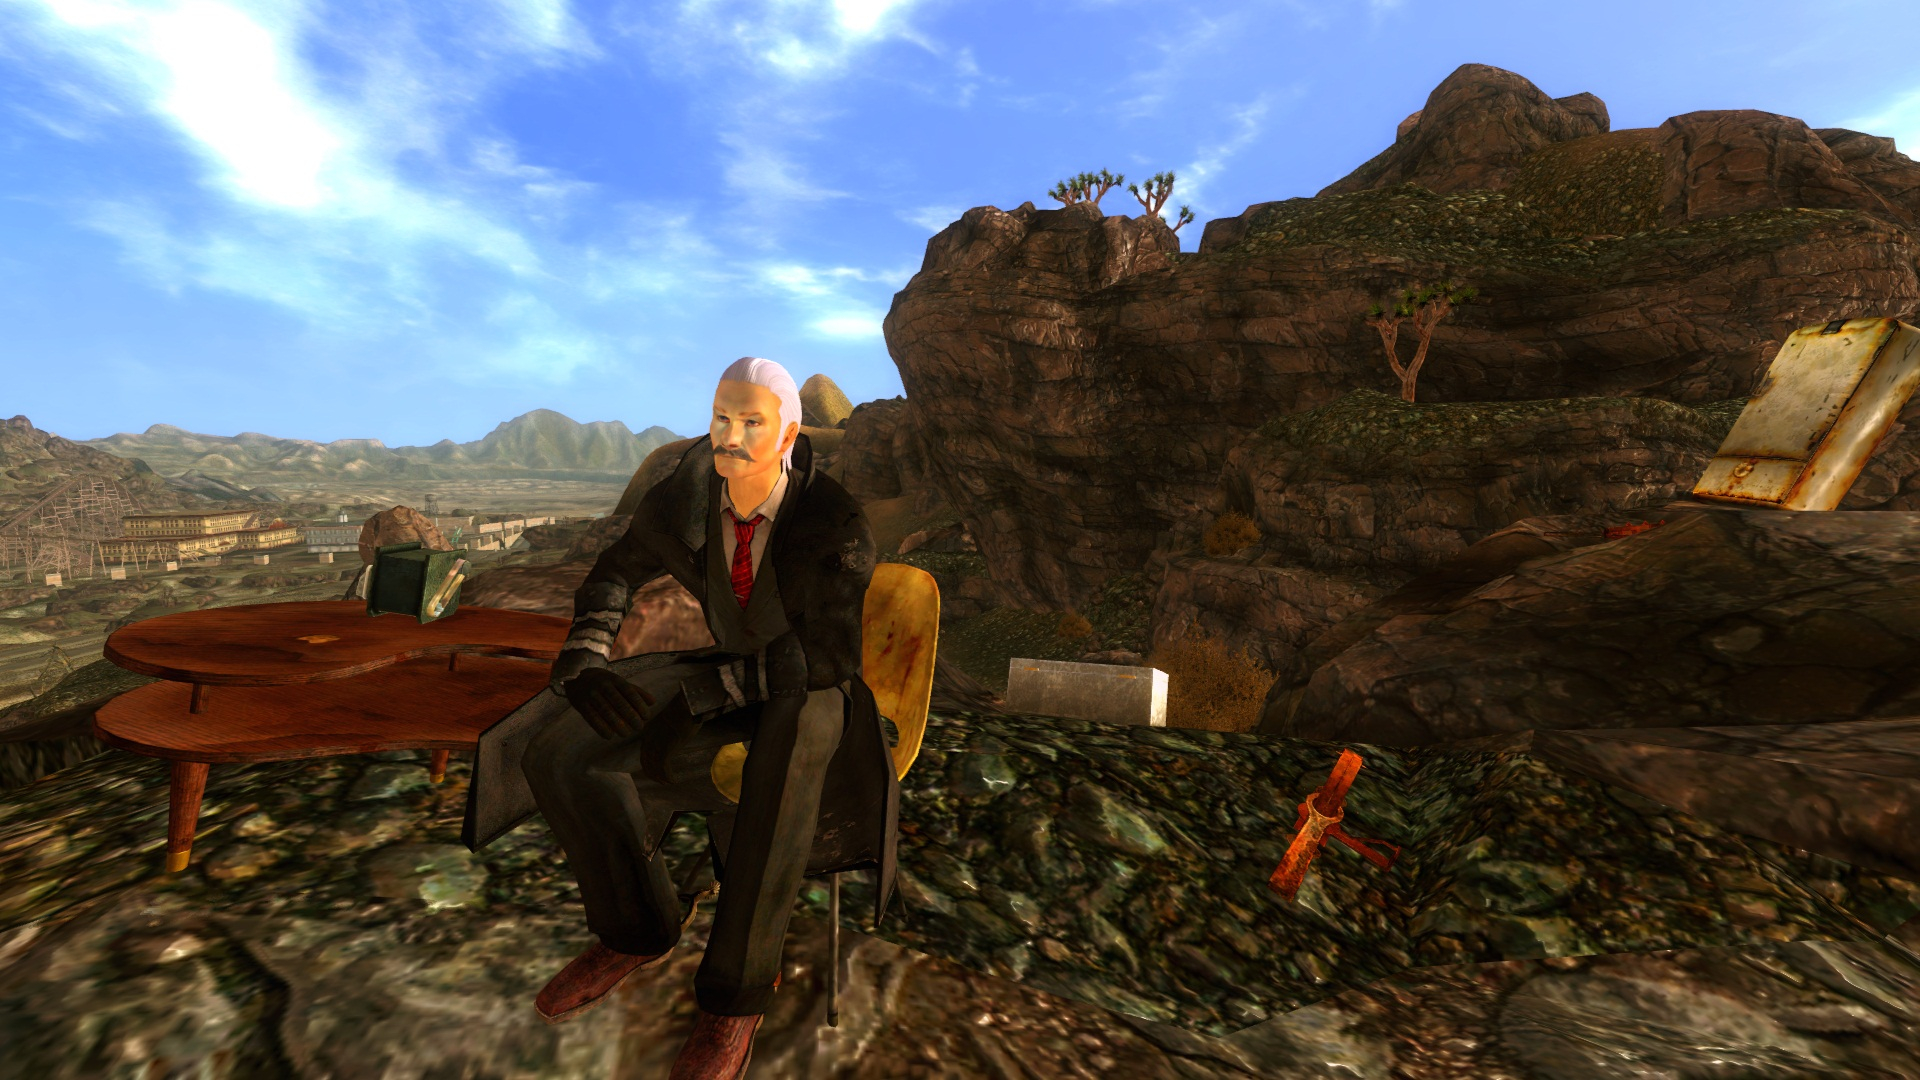 1920x1080 Revolver Ocelot at Fallout New Vegas mods and community